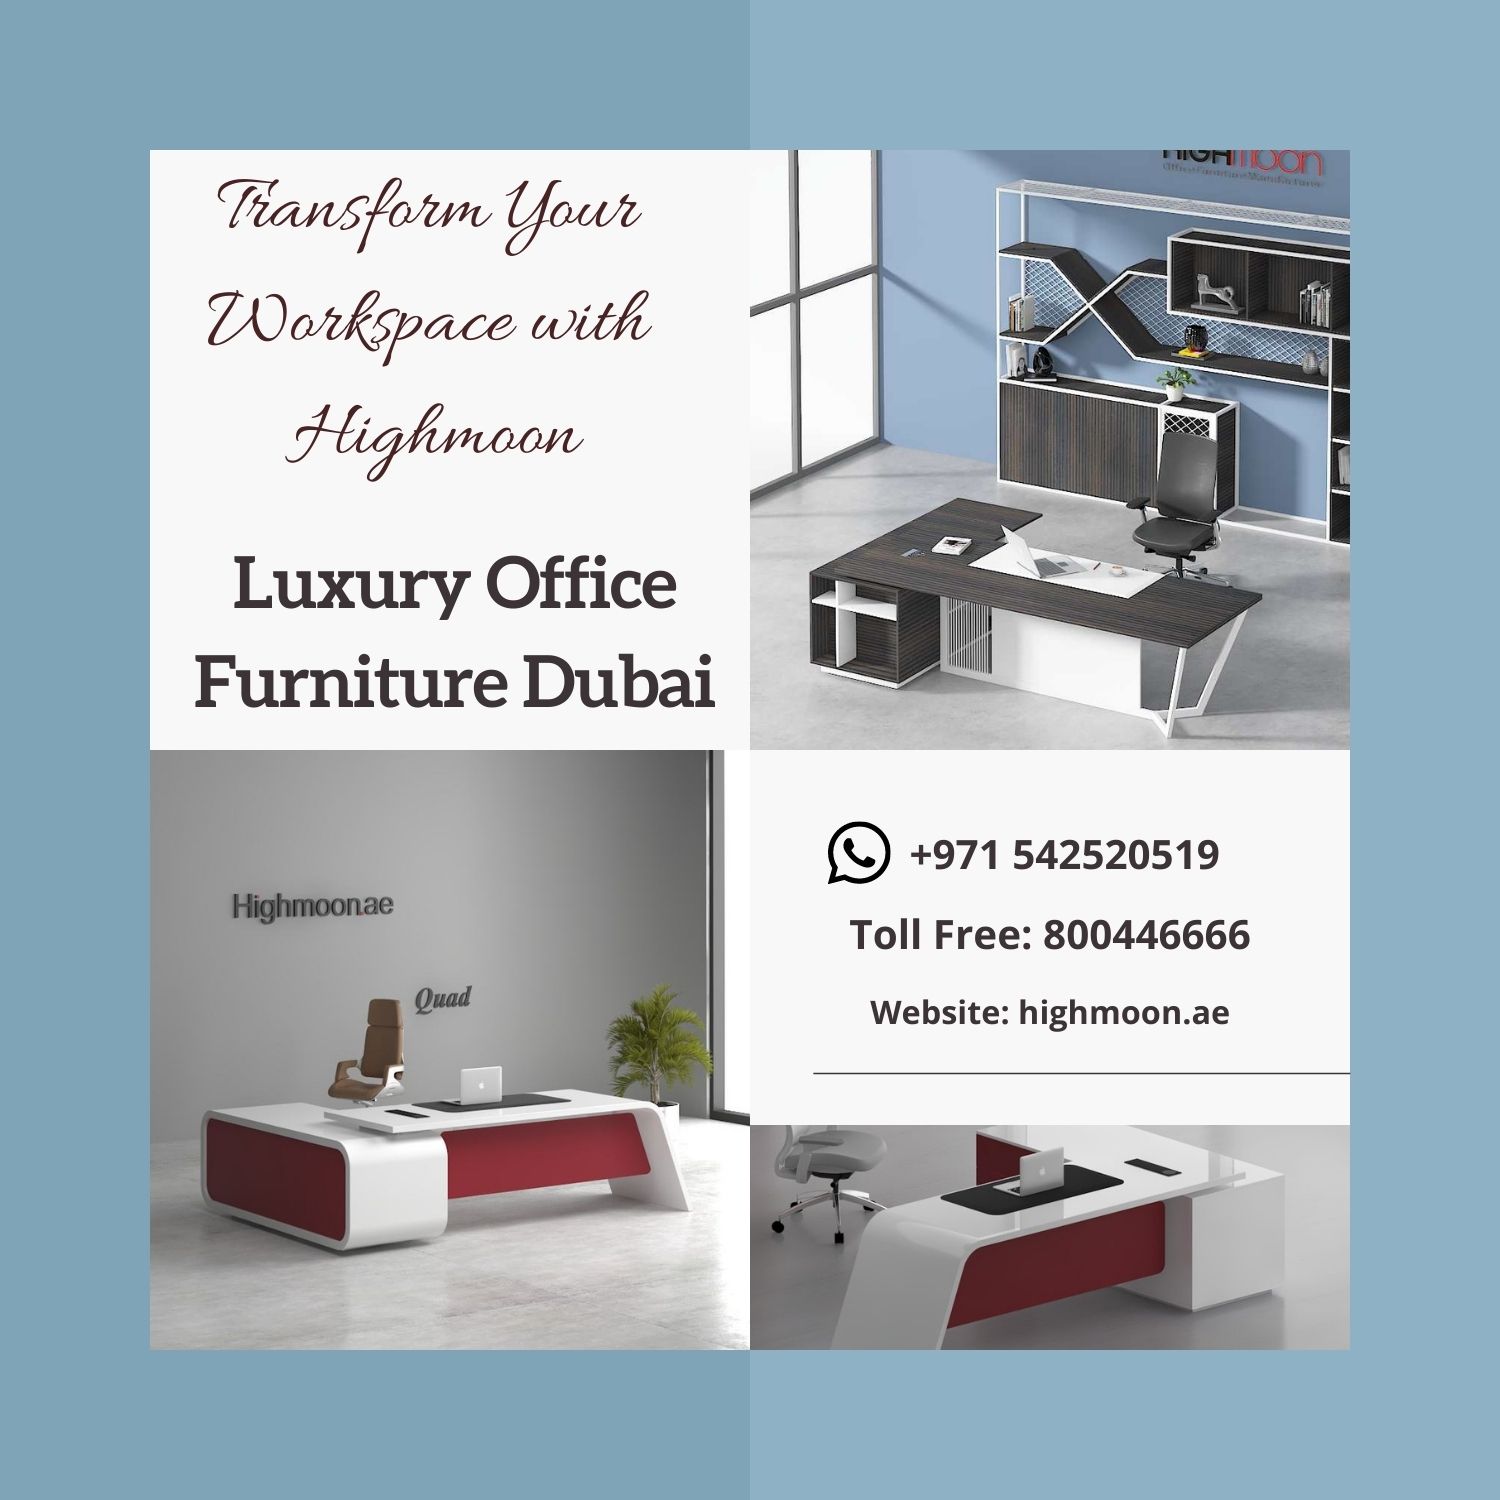 Transform Your Workspace With Highmoon Luxury Office Furniture Dubai